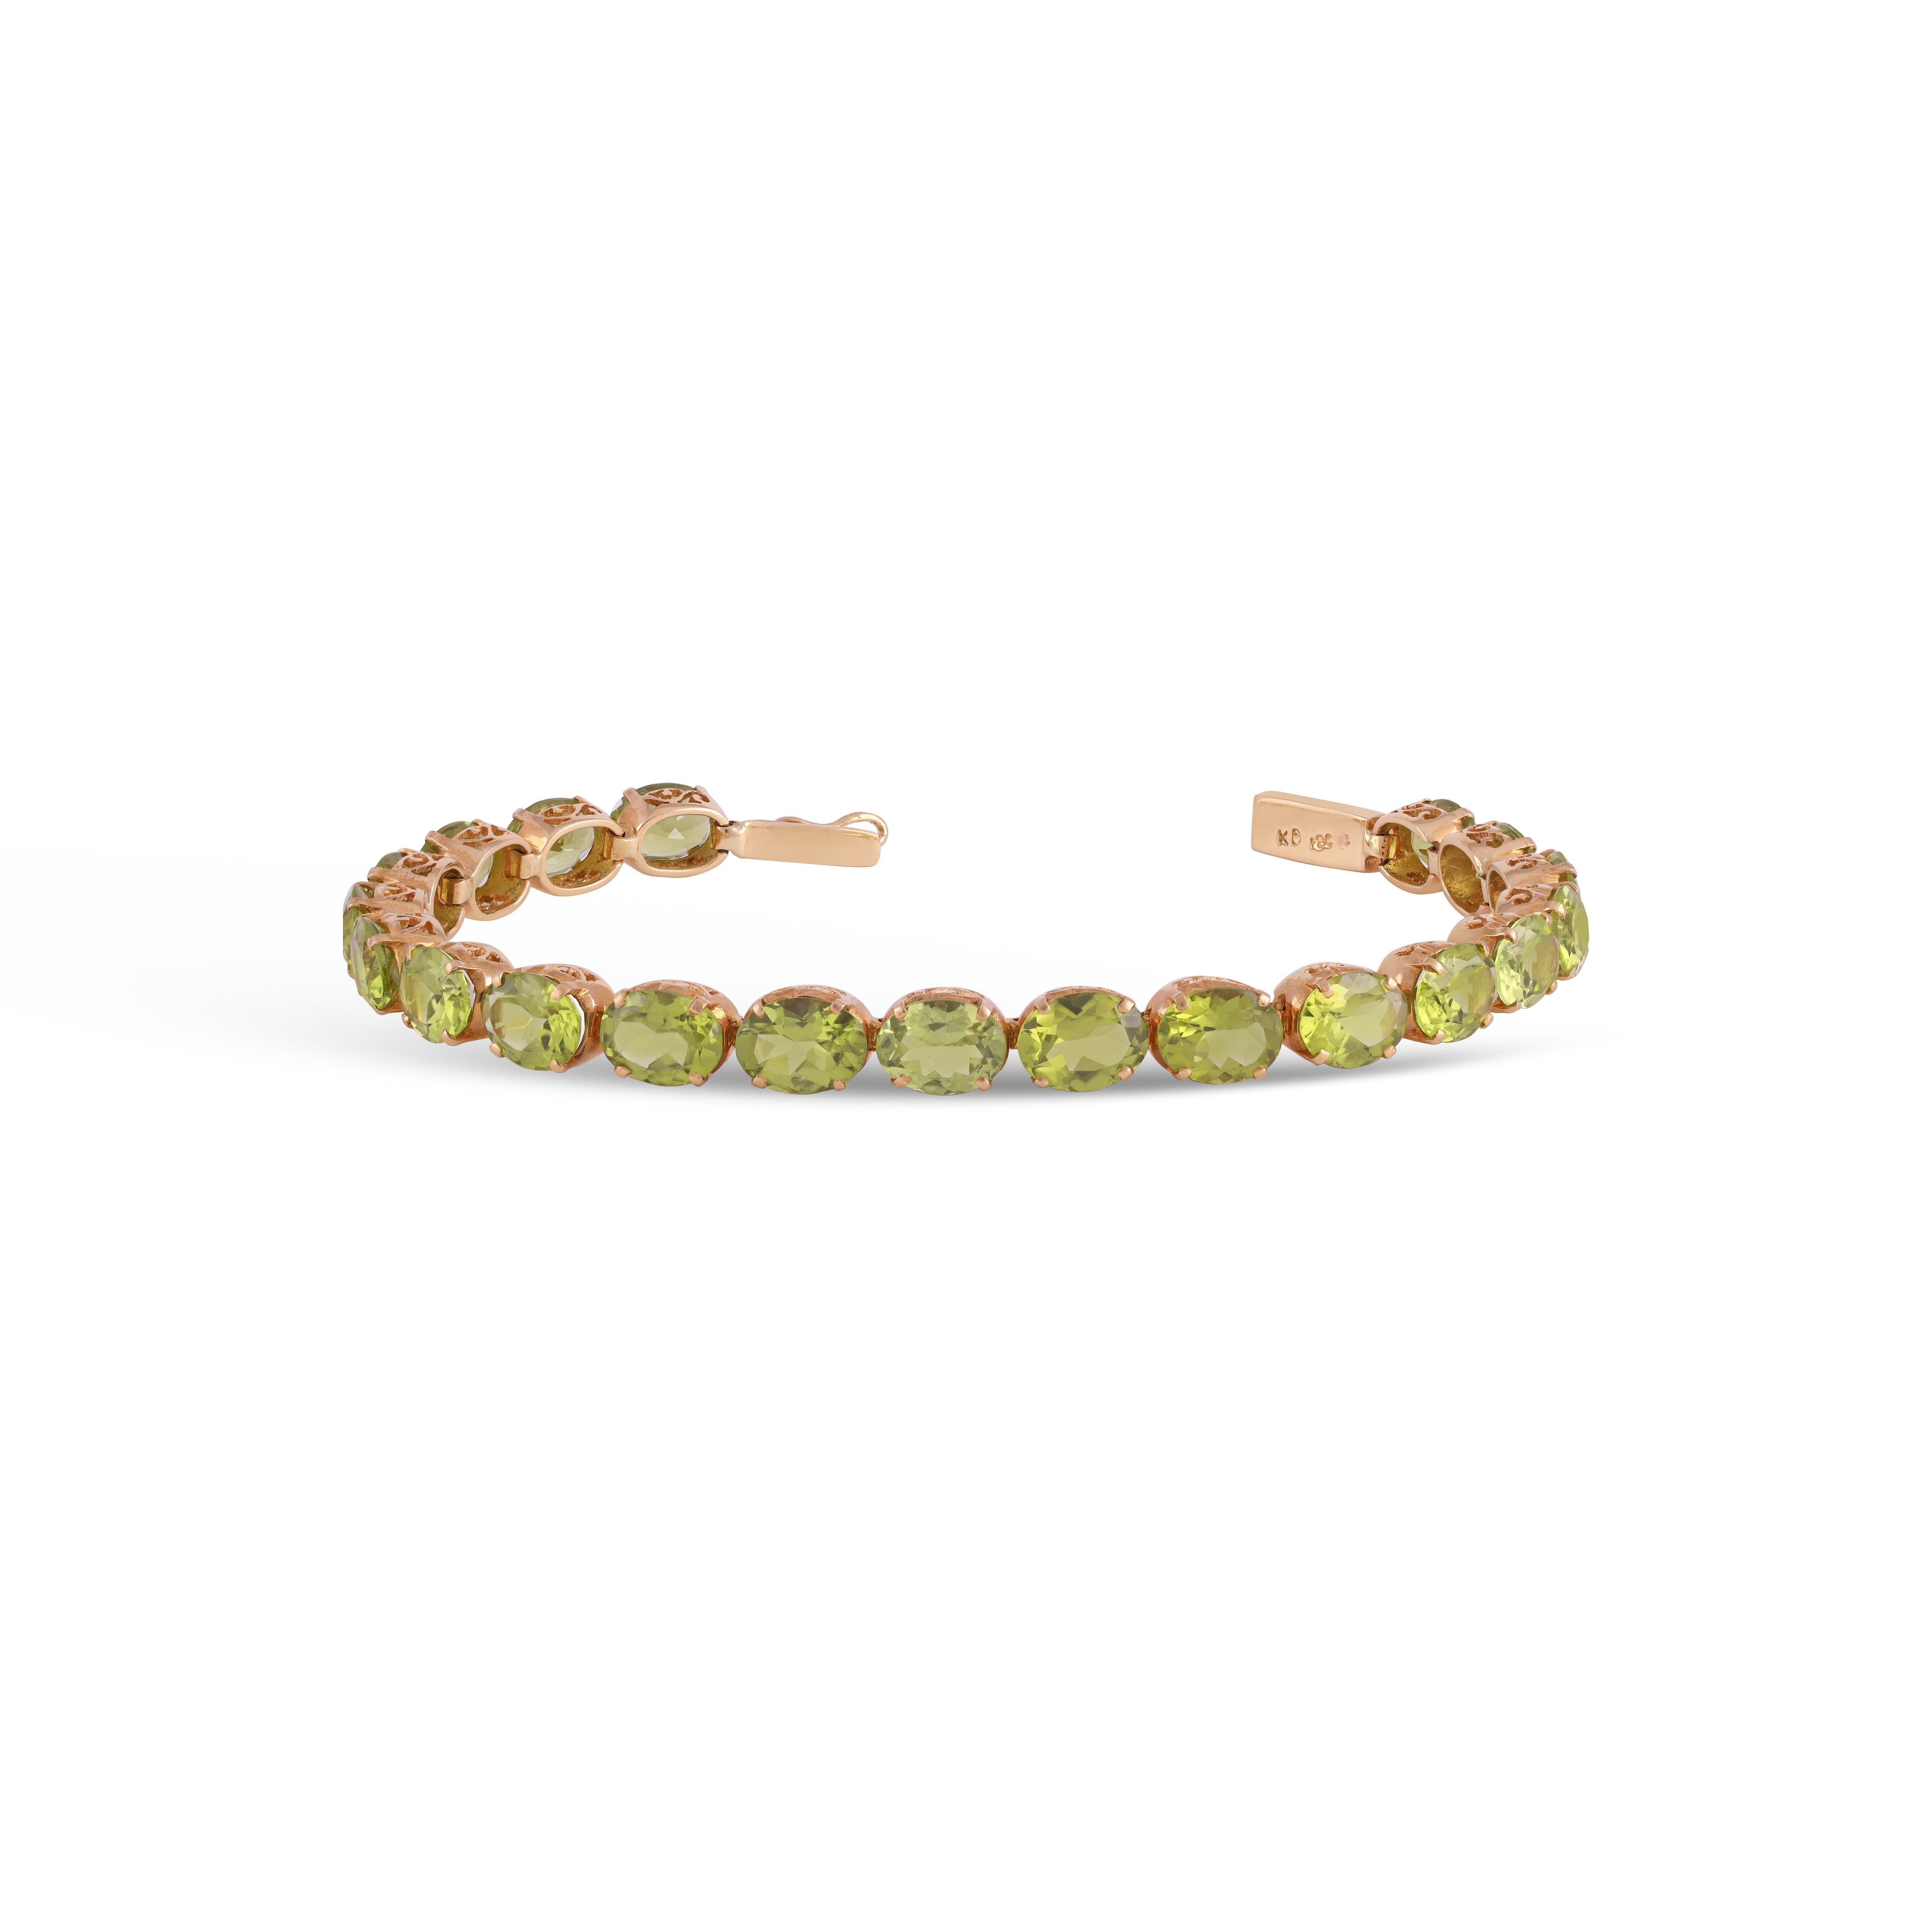 23.55 Carat Peridot Bracelet in 18k Gold

This magnificent Oval shape Peridot Bracelet is incredulous. The solitaire Oval-shaped Oval-cut Peridot are beautifully.


Details of the piece:
Peridot : 23.55 Carat
Gold:  18k gold

Size - 5.5